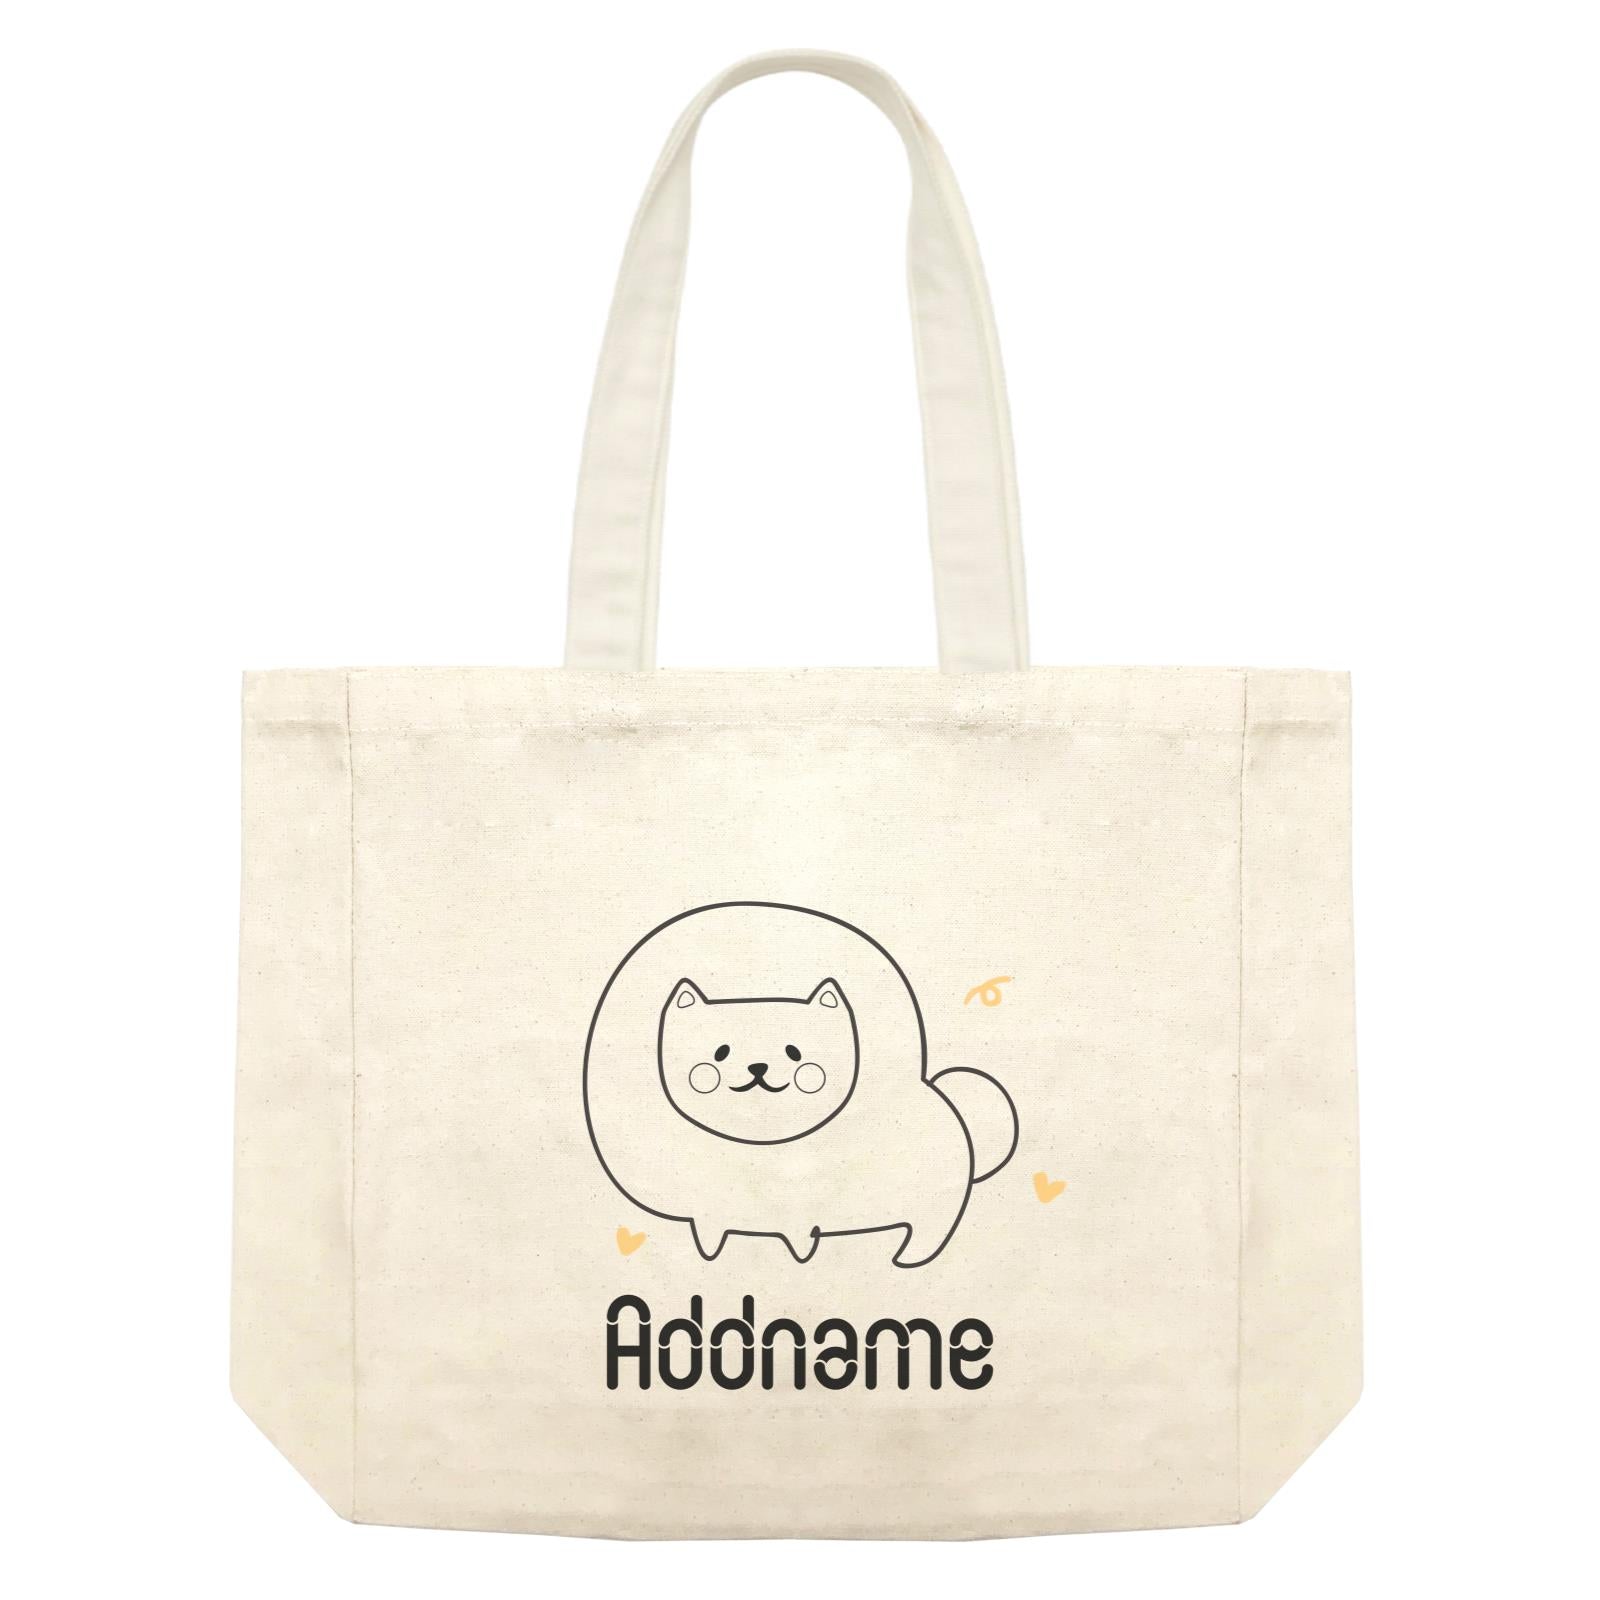 Coloring Outline Cute Hand Drawn Animals Dogs Pomeranian Addname Shopping Bag